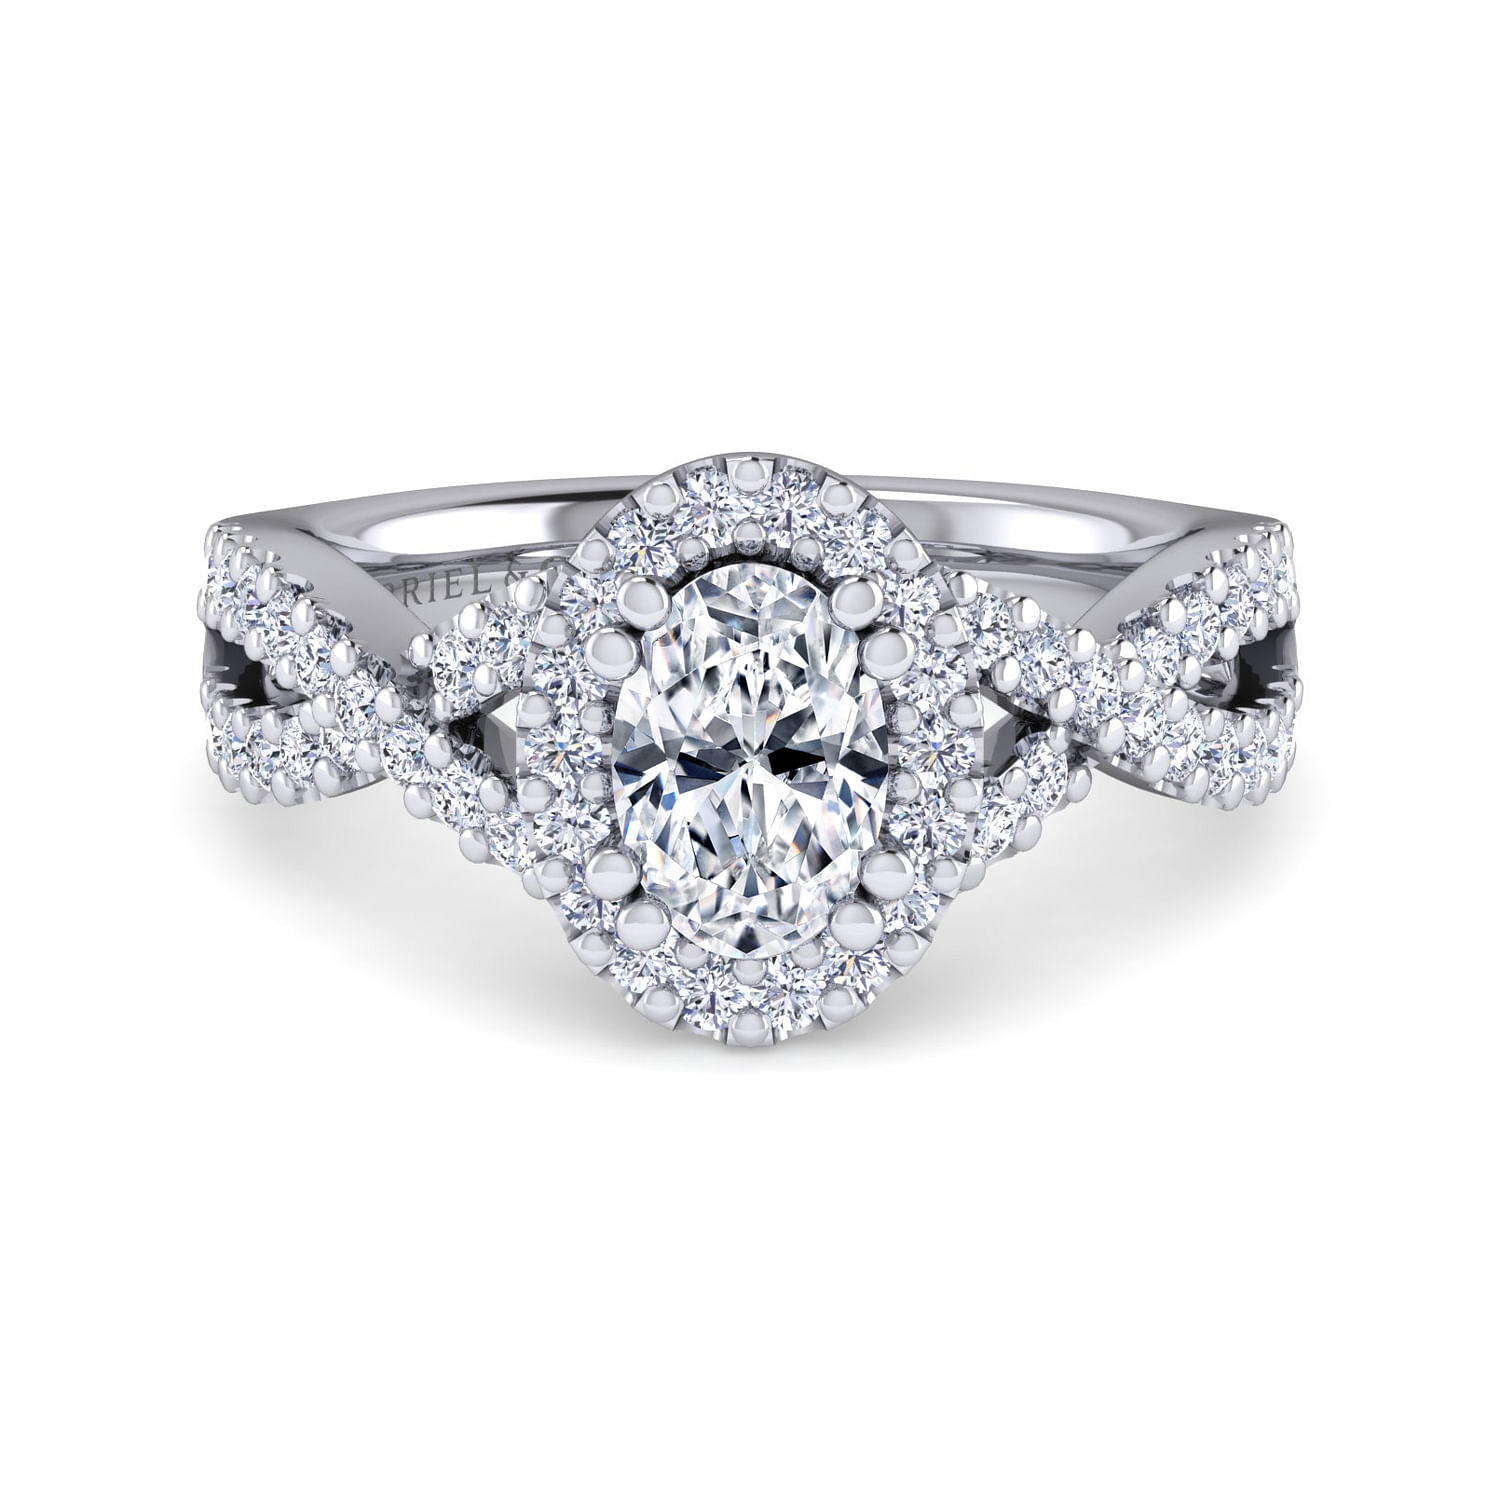 Kendie - 14K White Gold Oval Halo Diamond Engagement Ring